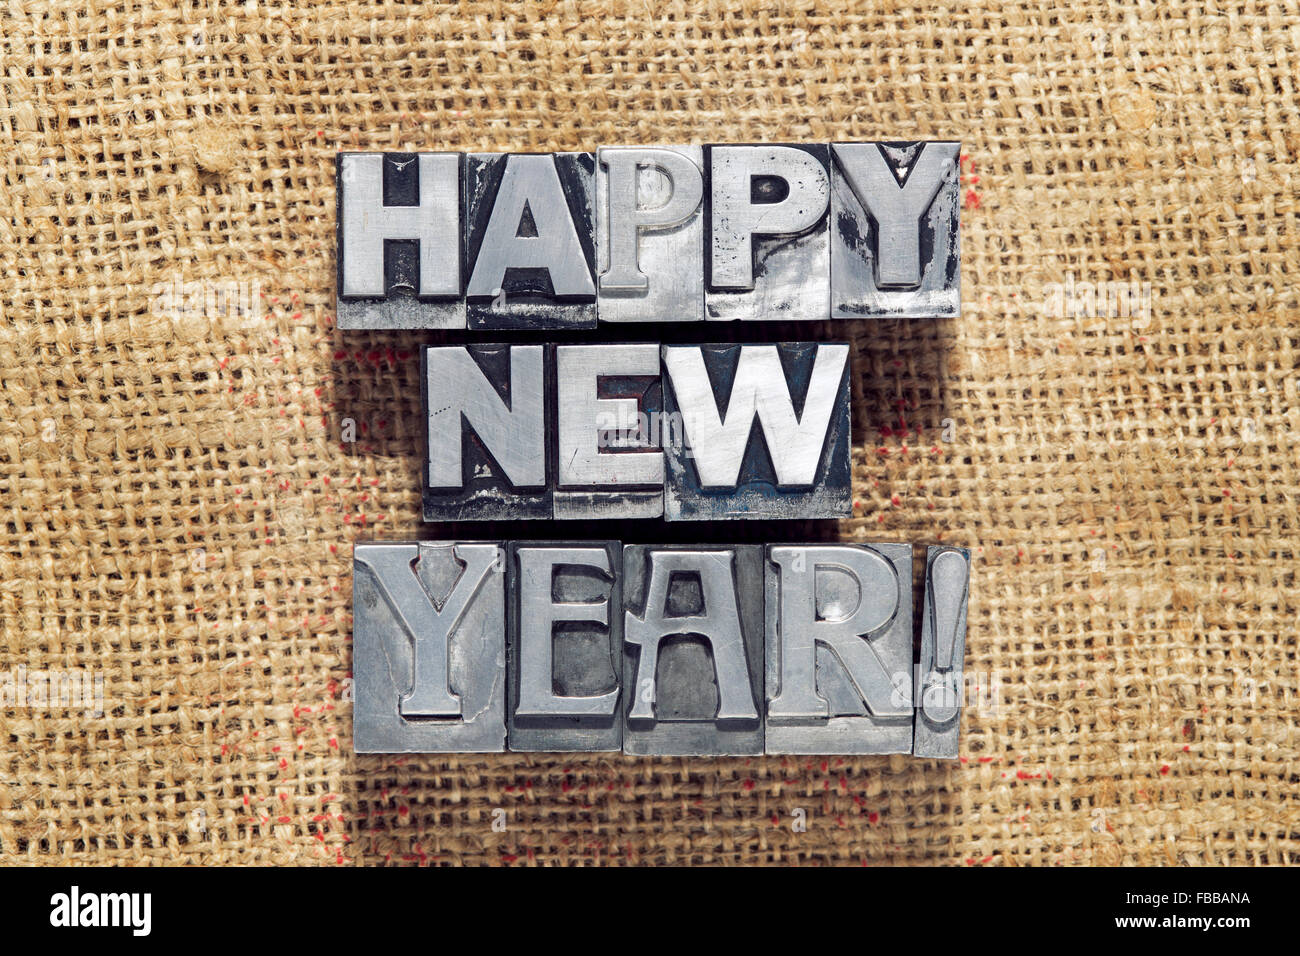 happy new year exclamation made from metallic letterpress type on vintage rough canvas Stock Photo